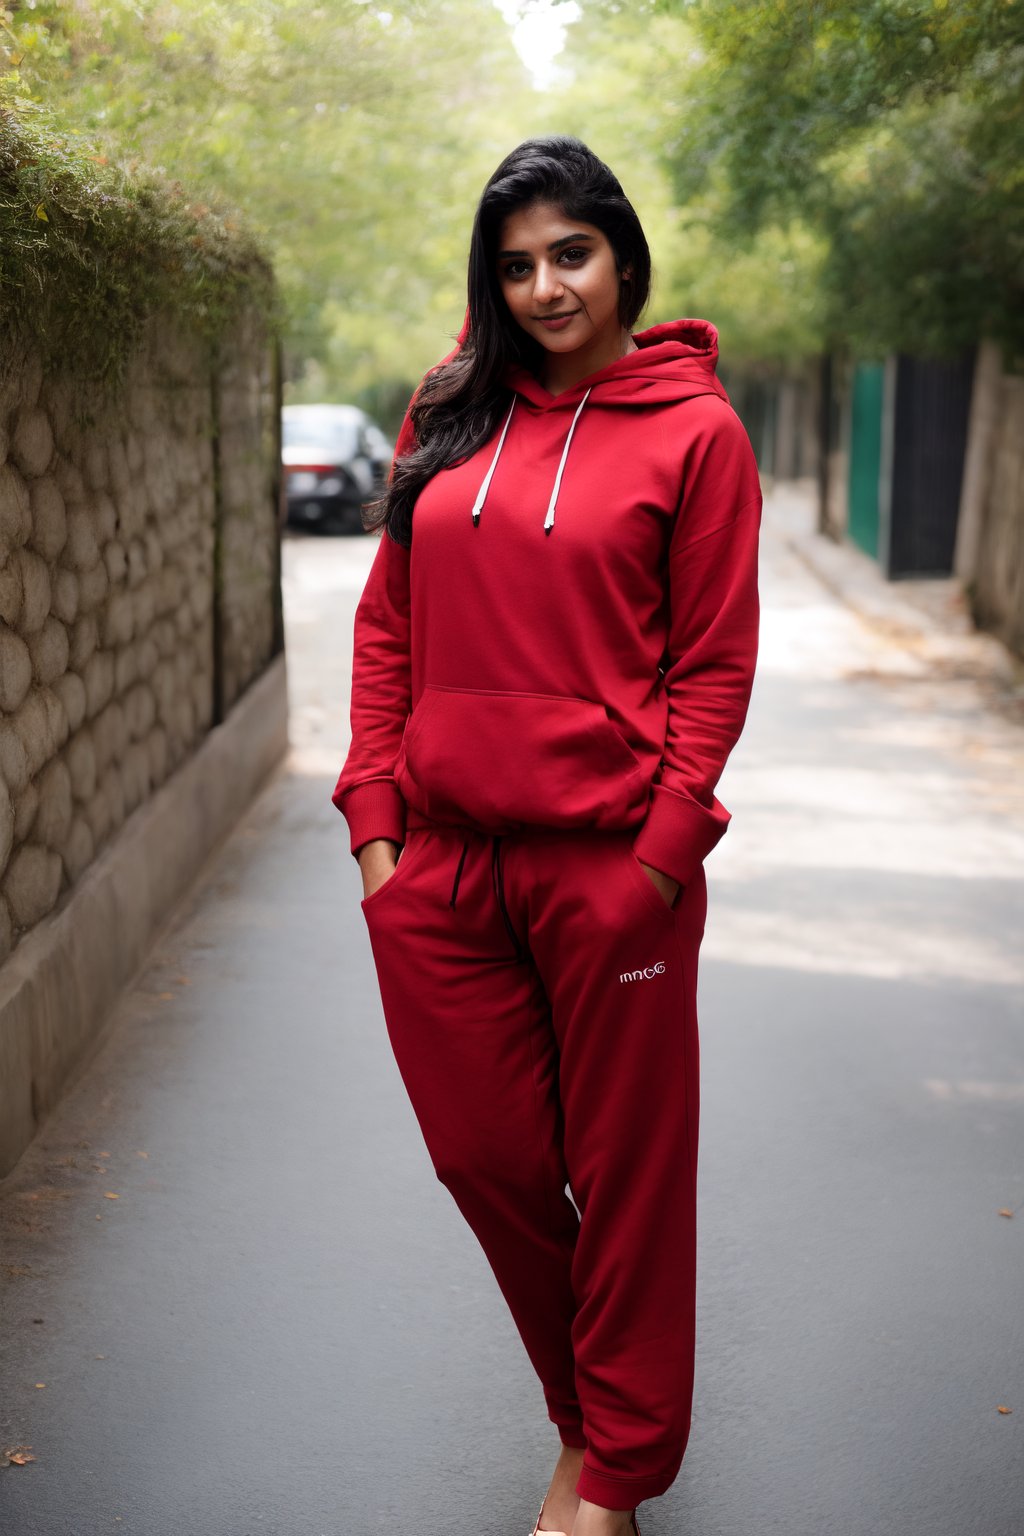 There a girl isma young hot beautiful hsdan girl Wearing red hoodie, hot looks face features like Kama Kaif, summer look Standing locking into the camera, portrait causal phets ResPurtrat